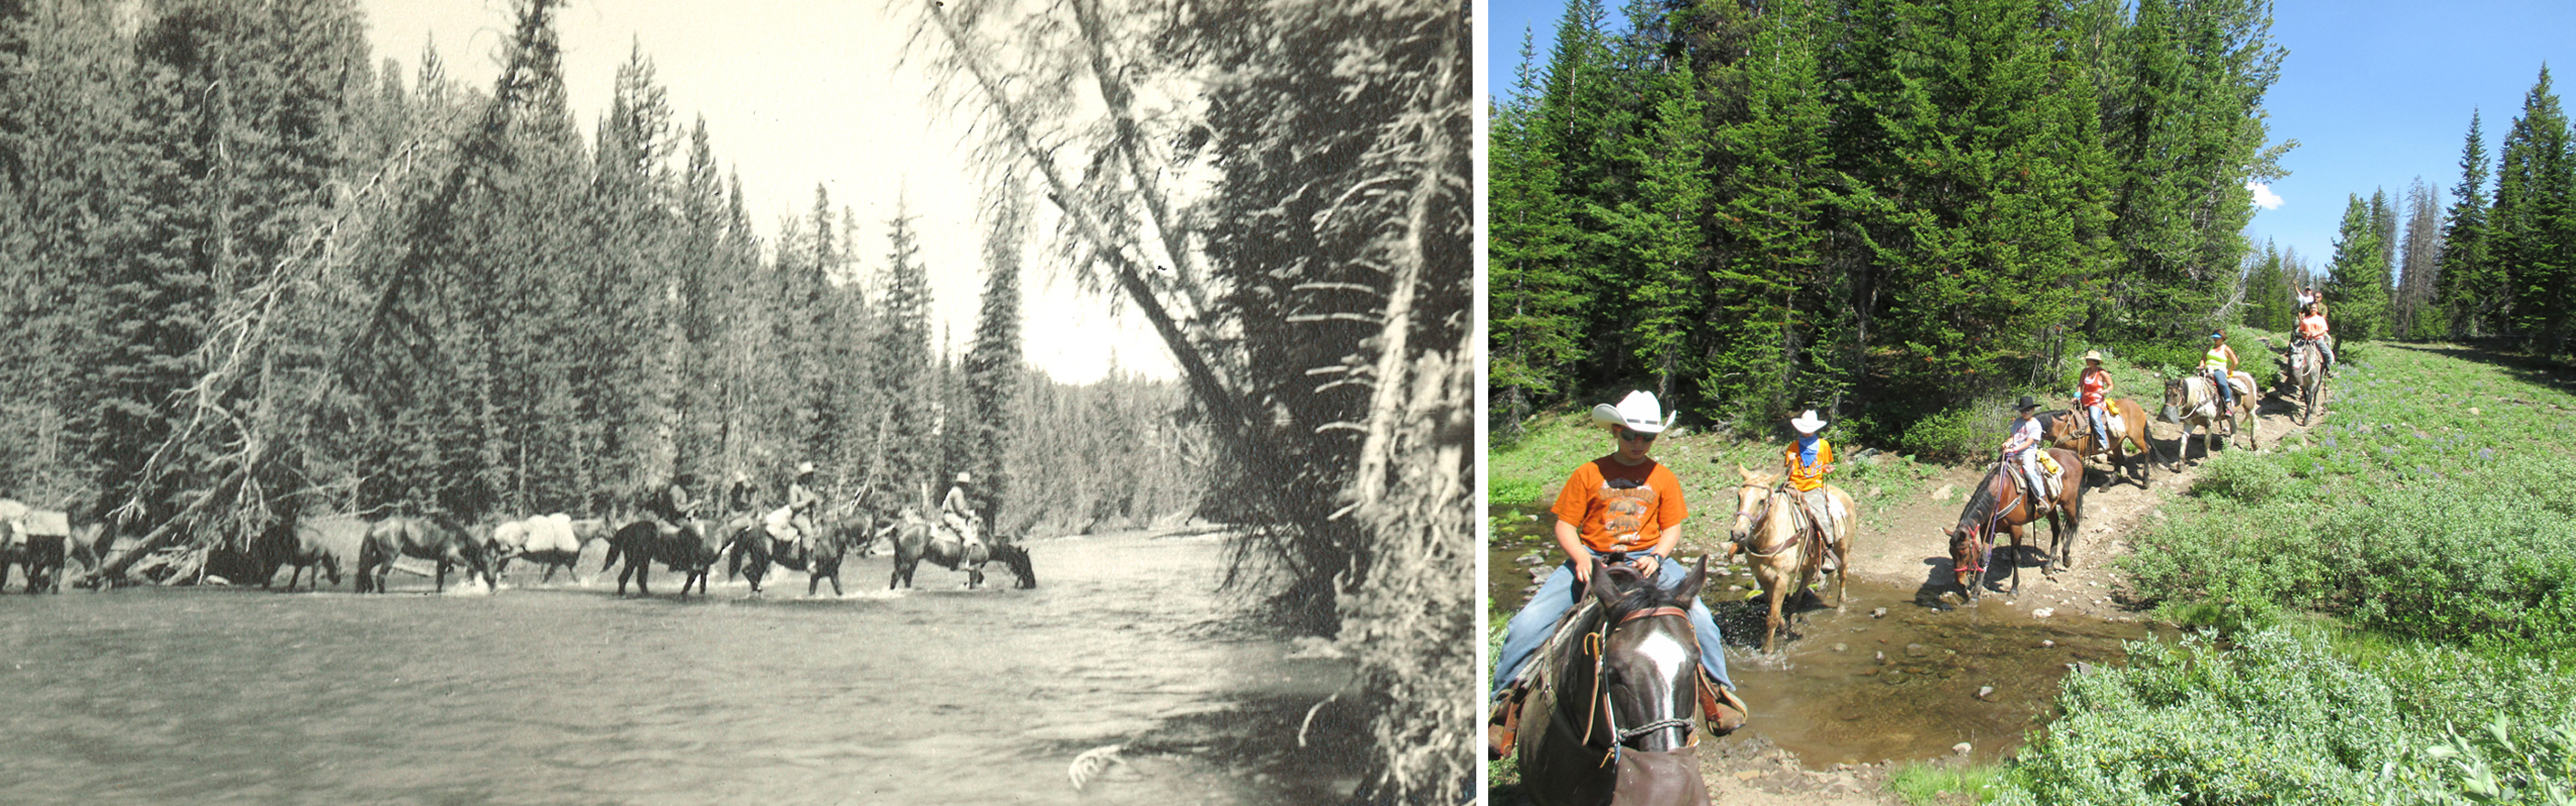 The Western traditions of the past are alive and well at Brooks Lake Lodge where guests can immerse themselves in outdoor activities reminiscent of the original travelers, including horseback riding.